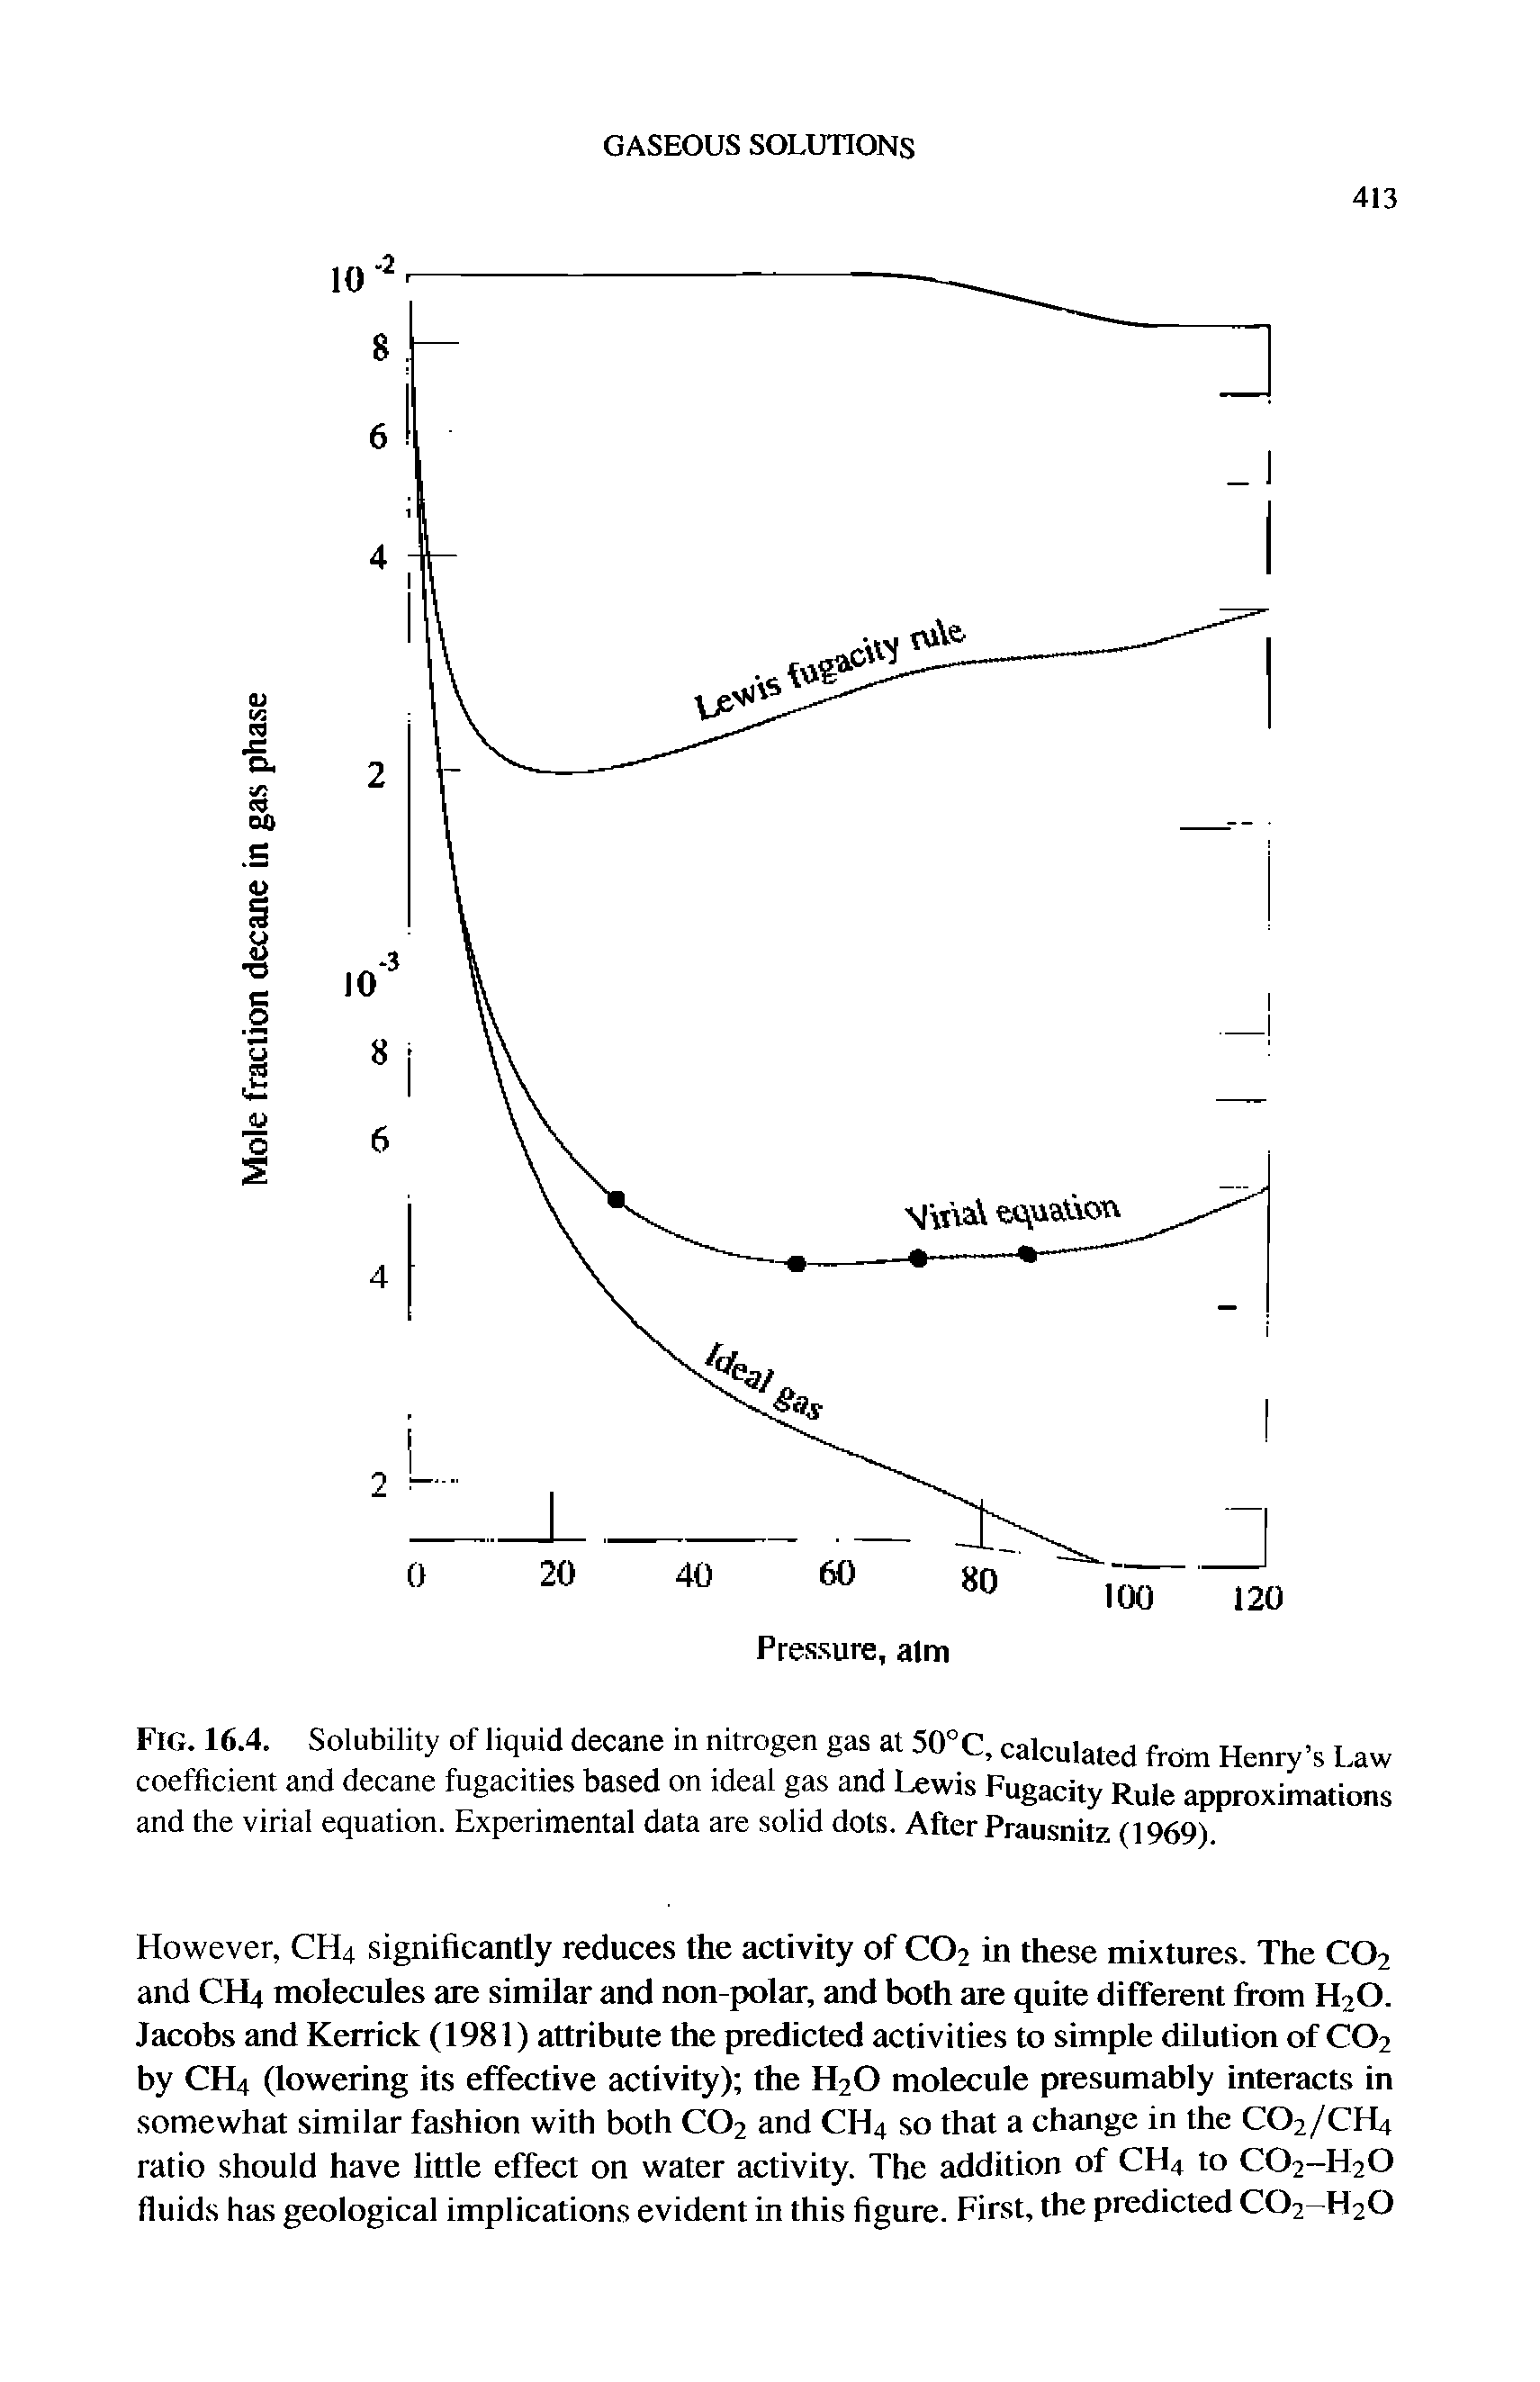 Fig. 16.4. Solubility of liquid decane in nitrogen gas at 50°C, calculated from Henry s Law coefficient and decane fugacities based on ideal gas and Lewis Fugacity Rule approximations and the virial equation. Experimental data are solid dots. After Prausnitz (1969)...